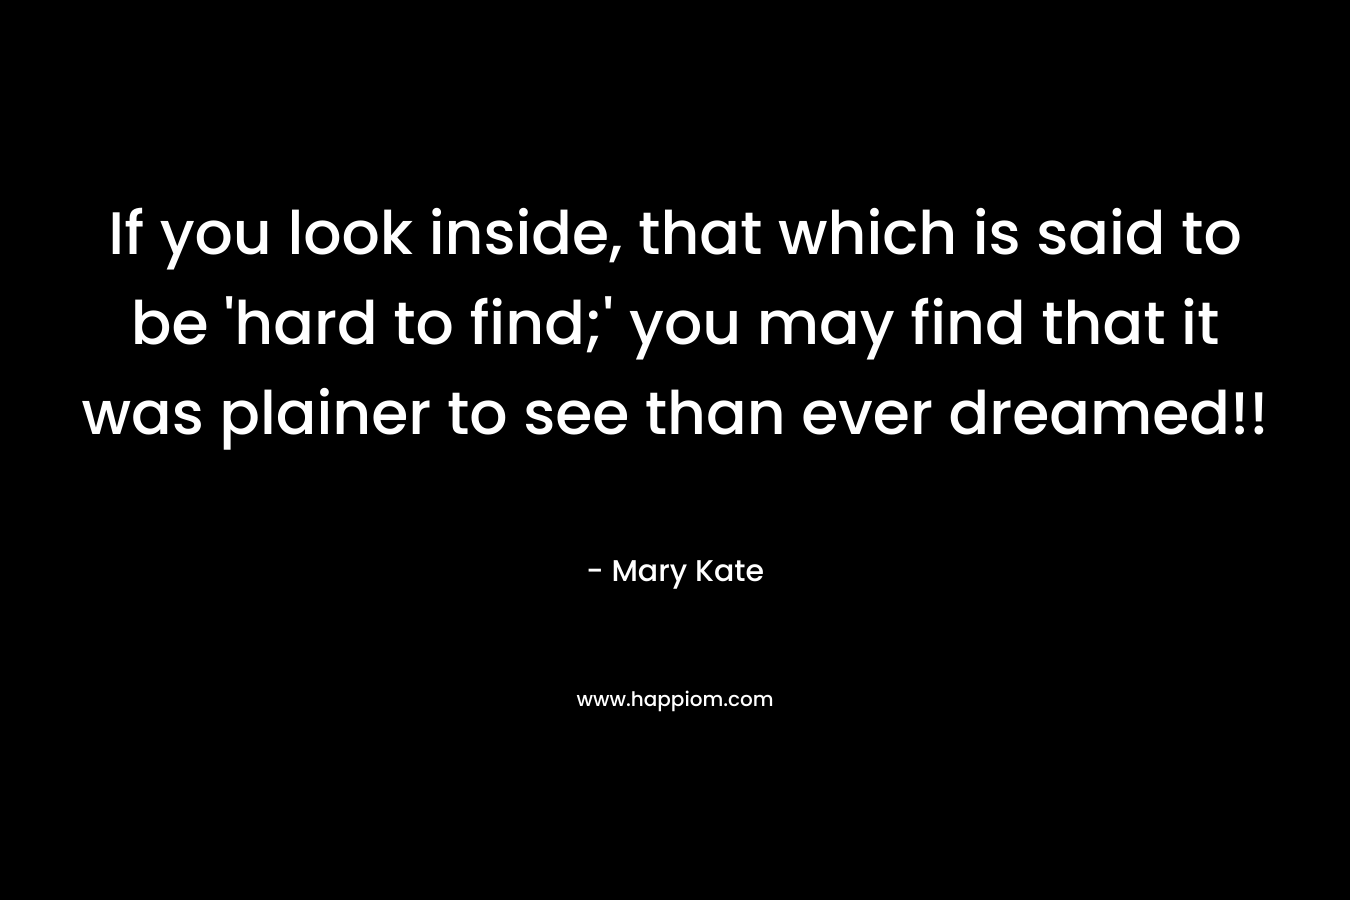 If you look inside, that which is said to be 'hard to find;' you may find that it was plainer to see than ever dreamed!!